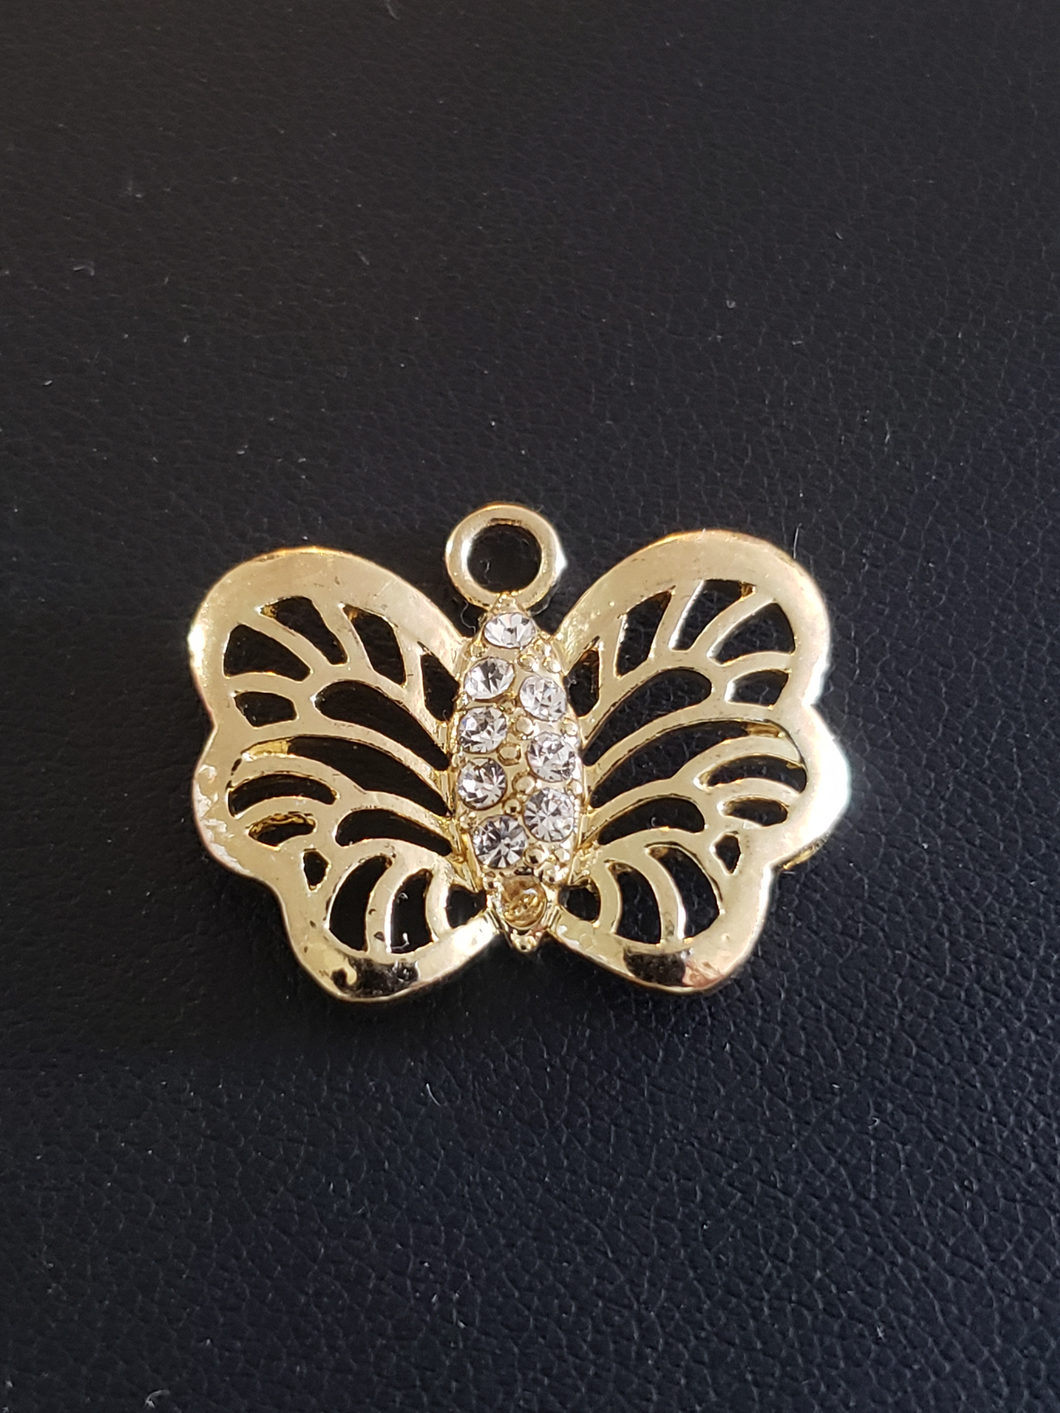 Butterfly with hollow wings and crystals